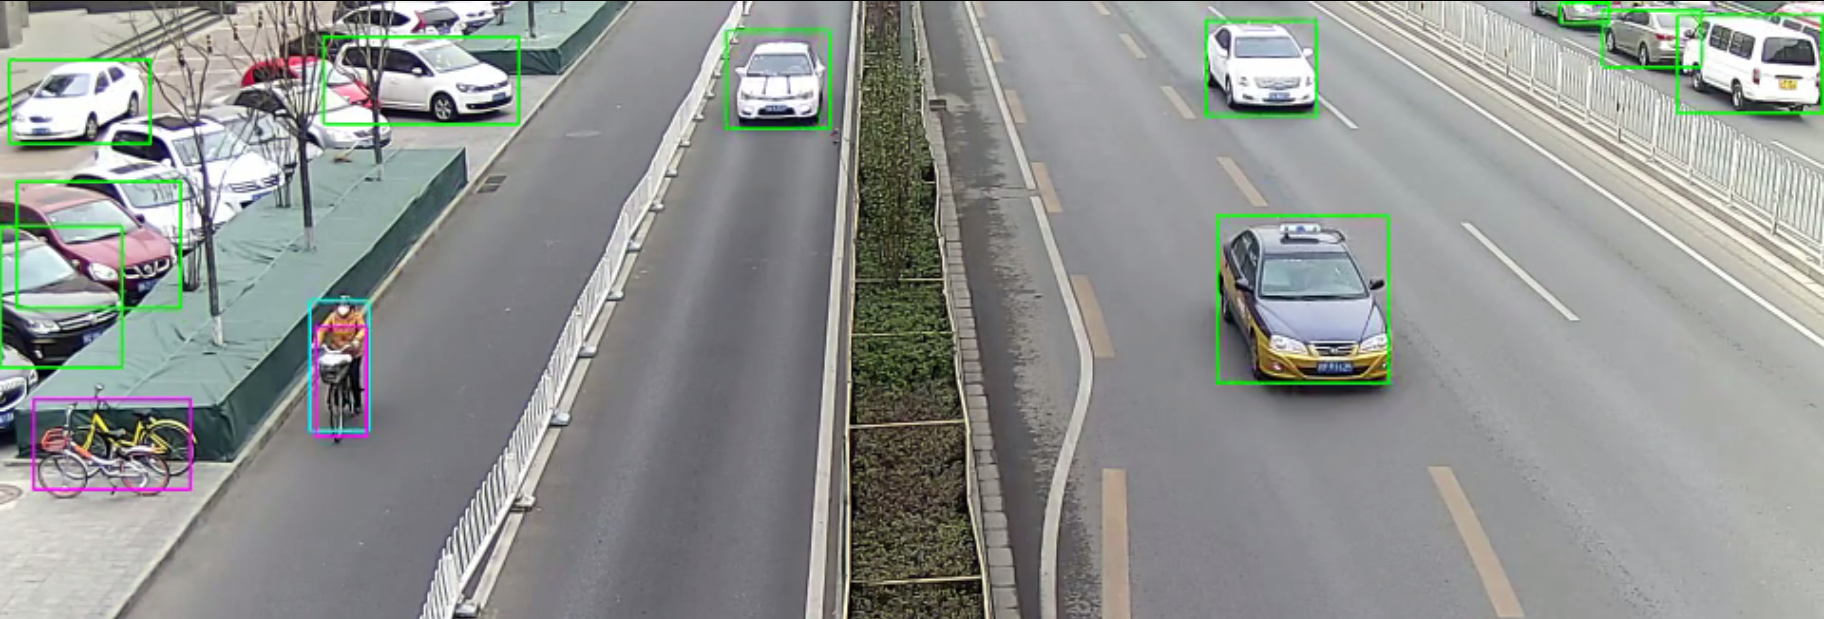 _images/person-vehicle-bike-detection-2002.png